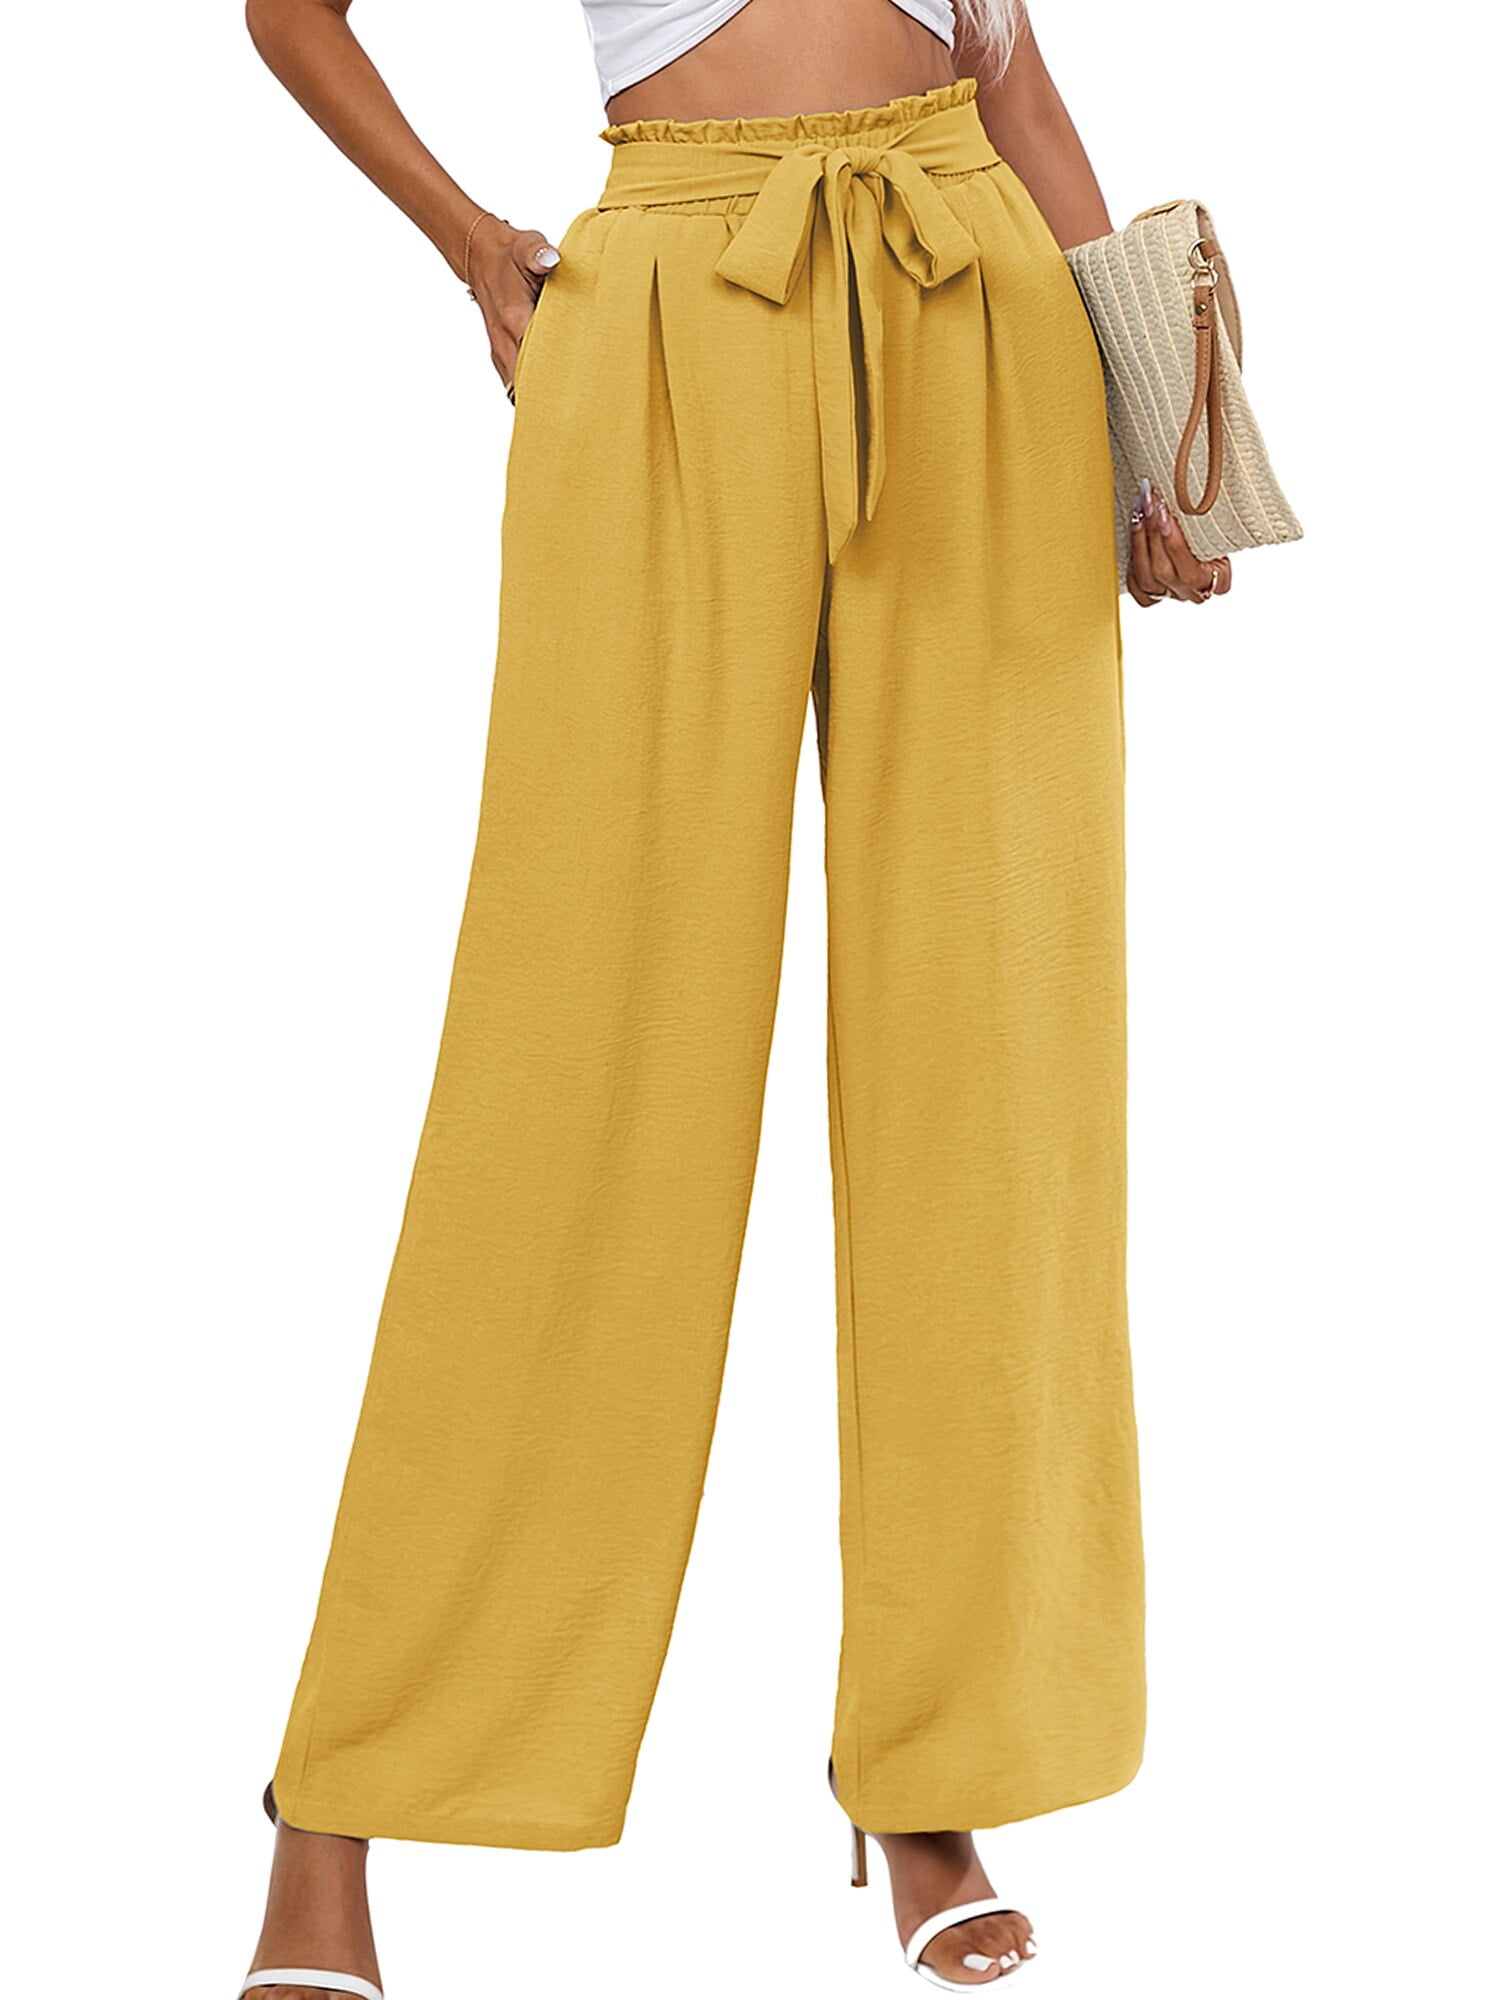 Light Yellow High Rise Pants Size 6, Jeans With Pockets, Cotton Chino Pants  Size S, Wide Leg Crop, Girlfriend Pants, Straight Leg Jeans 